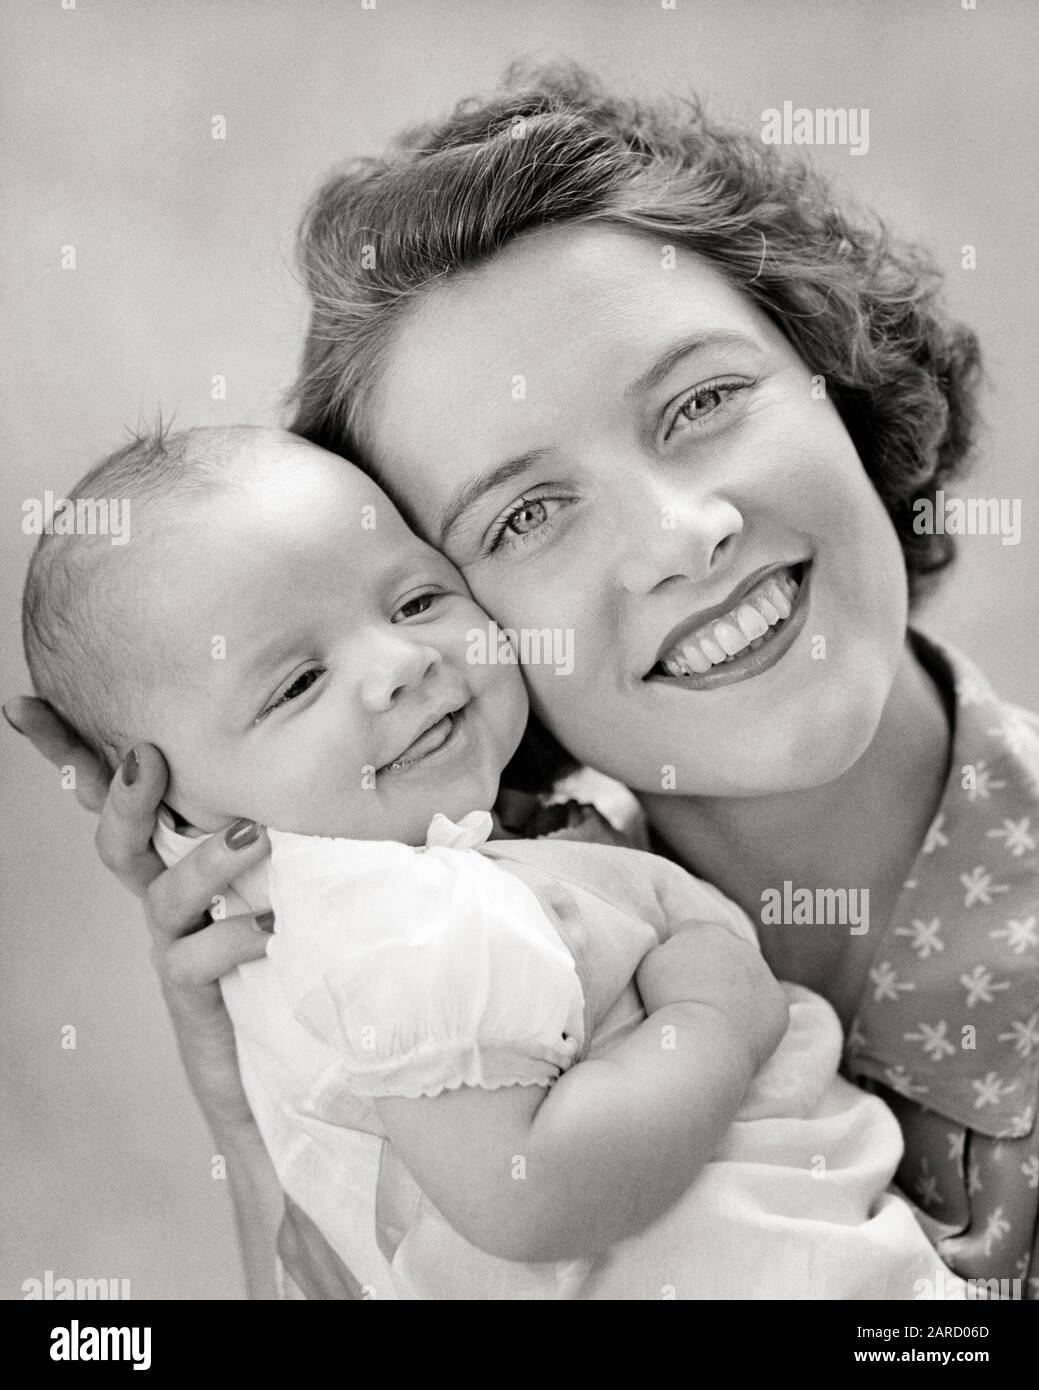 1940s PORTRAIT OF SMILING MOTHER LOOKING AT CAMERA HOLDING BABY DAUGHTER CHEEK TO CHEEK - b14414 HAR001 HARS OLD TIME FUTURE NOSTALGIA OLD FASHION 1 SILLY JUVENILE FACIAL YOUNG ADULT COMIC TEAMWORK INFANT PLEASED FAMILIES JOY LIFESTYLE SATISFACTION FEMALES RELATION STUDIO SHOT HEALTHINESS HOME LIFE COPY SPACE LADIES DAUGHTERS PERSONS CARING SPIRITUALITY EXPRESSIONS B&W EYE CONTACT HUMOROUS HAPPINESS HEAD AND SHOULDERS CHEERFUL AND COMICAL PRIDE RELATIONSHIPS SMILES CONNECTION COMEDY JOYFUL RELATED COOPERATION GROWTH JUVENILES MOMS TOGETHERNESS YOUNG ADULT WOMAN BABY GIRL BLACK AND WHITE Stock Photo